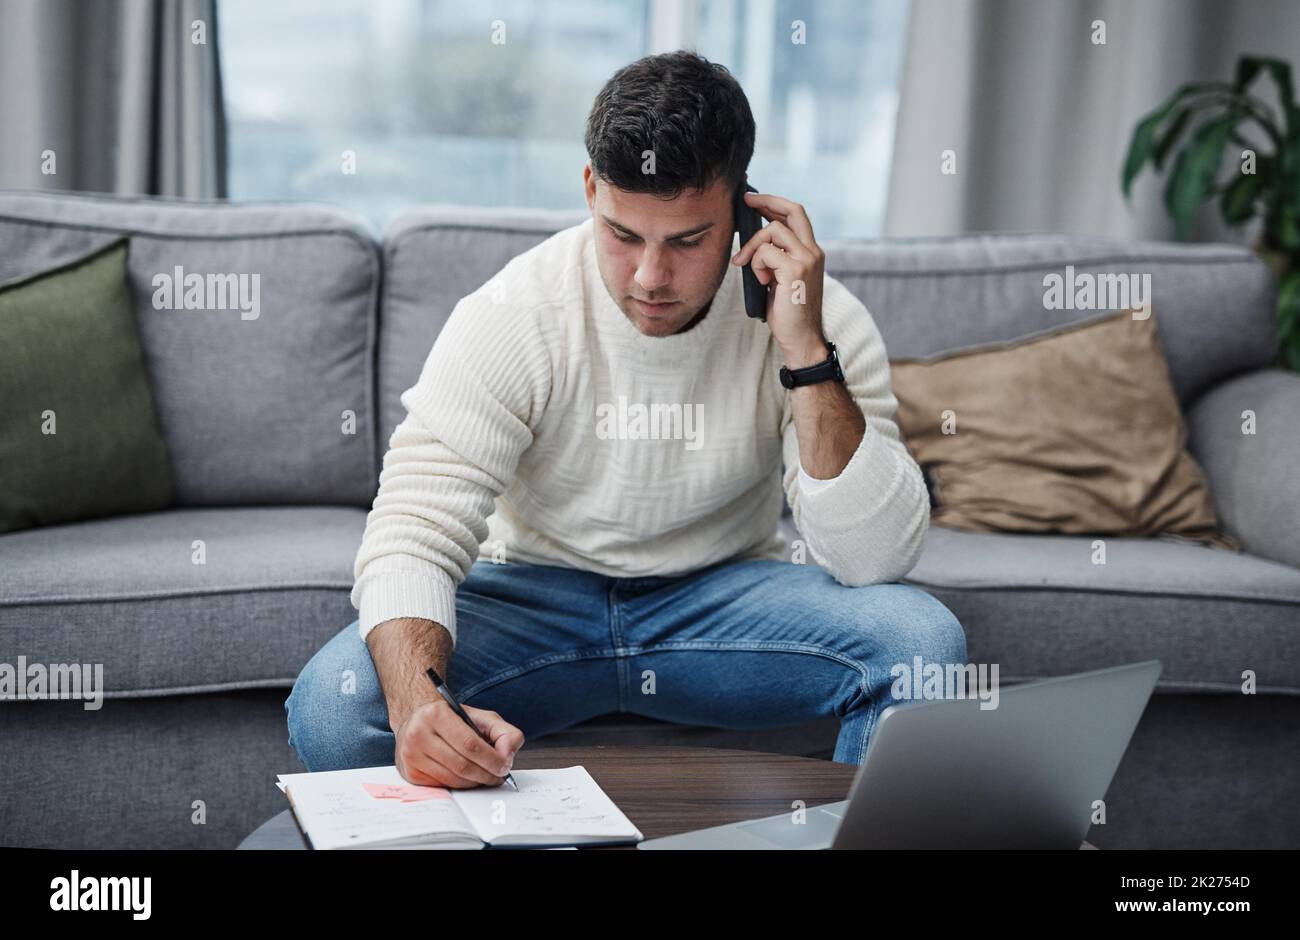 Part living space, part work space. Shot of a young man using a laptop and smartphone while writing in a notebook at home. Stock Photo